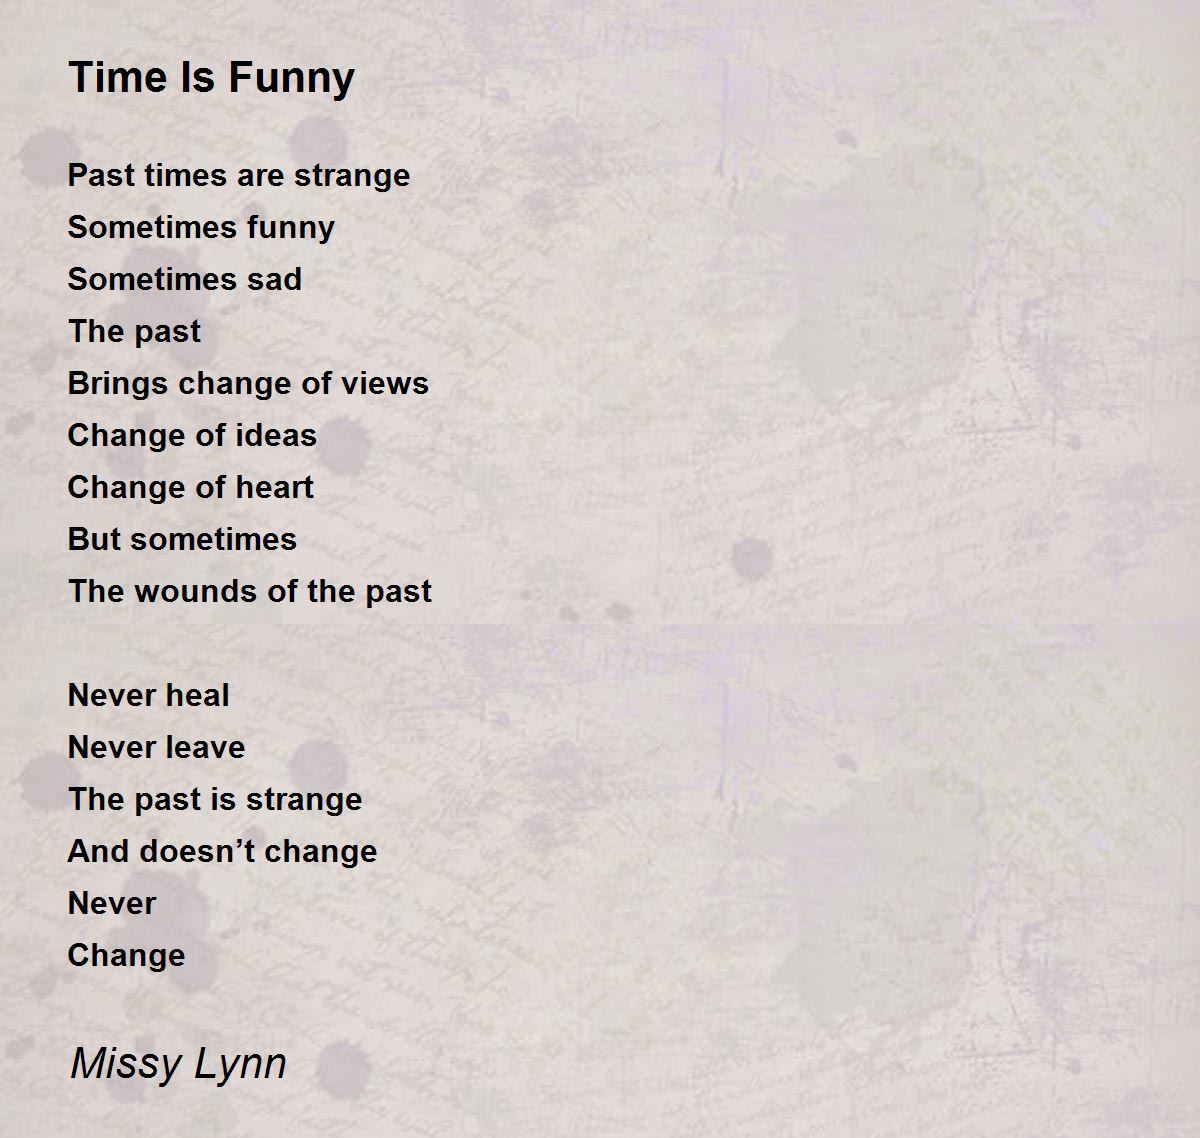 Time Is Funny - Time Is Funny Poem by Missy Lynn